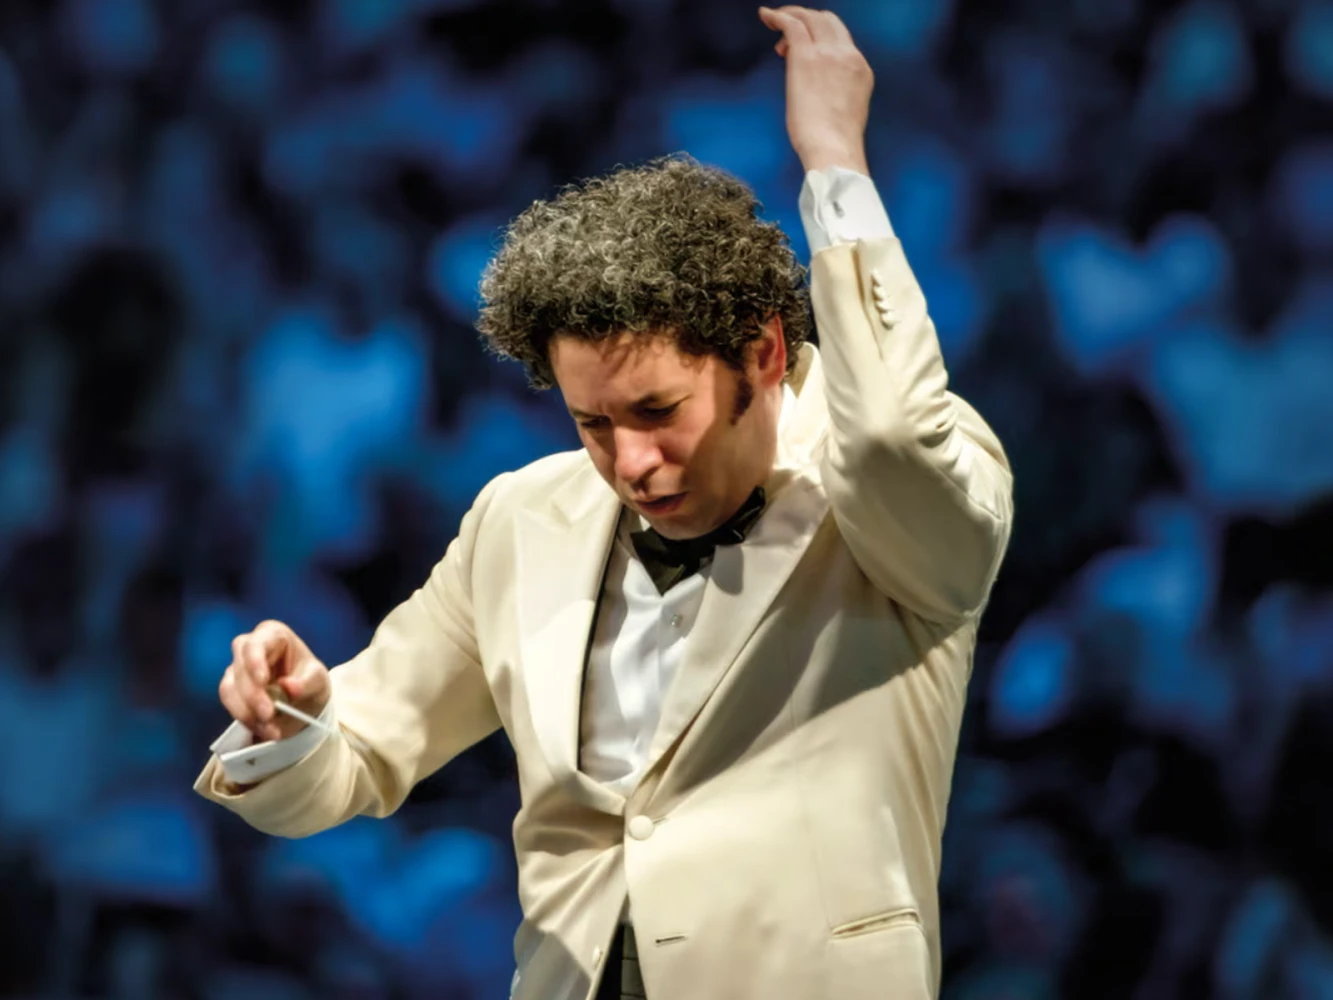 Gustavo Dudamel & Yunchan Lim: What to expect - 1